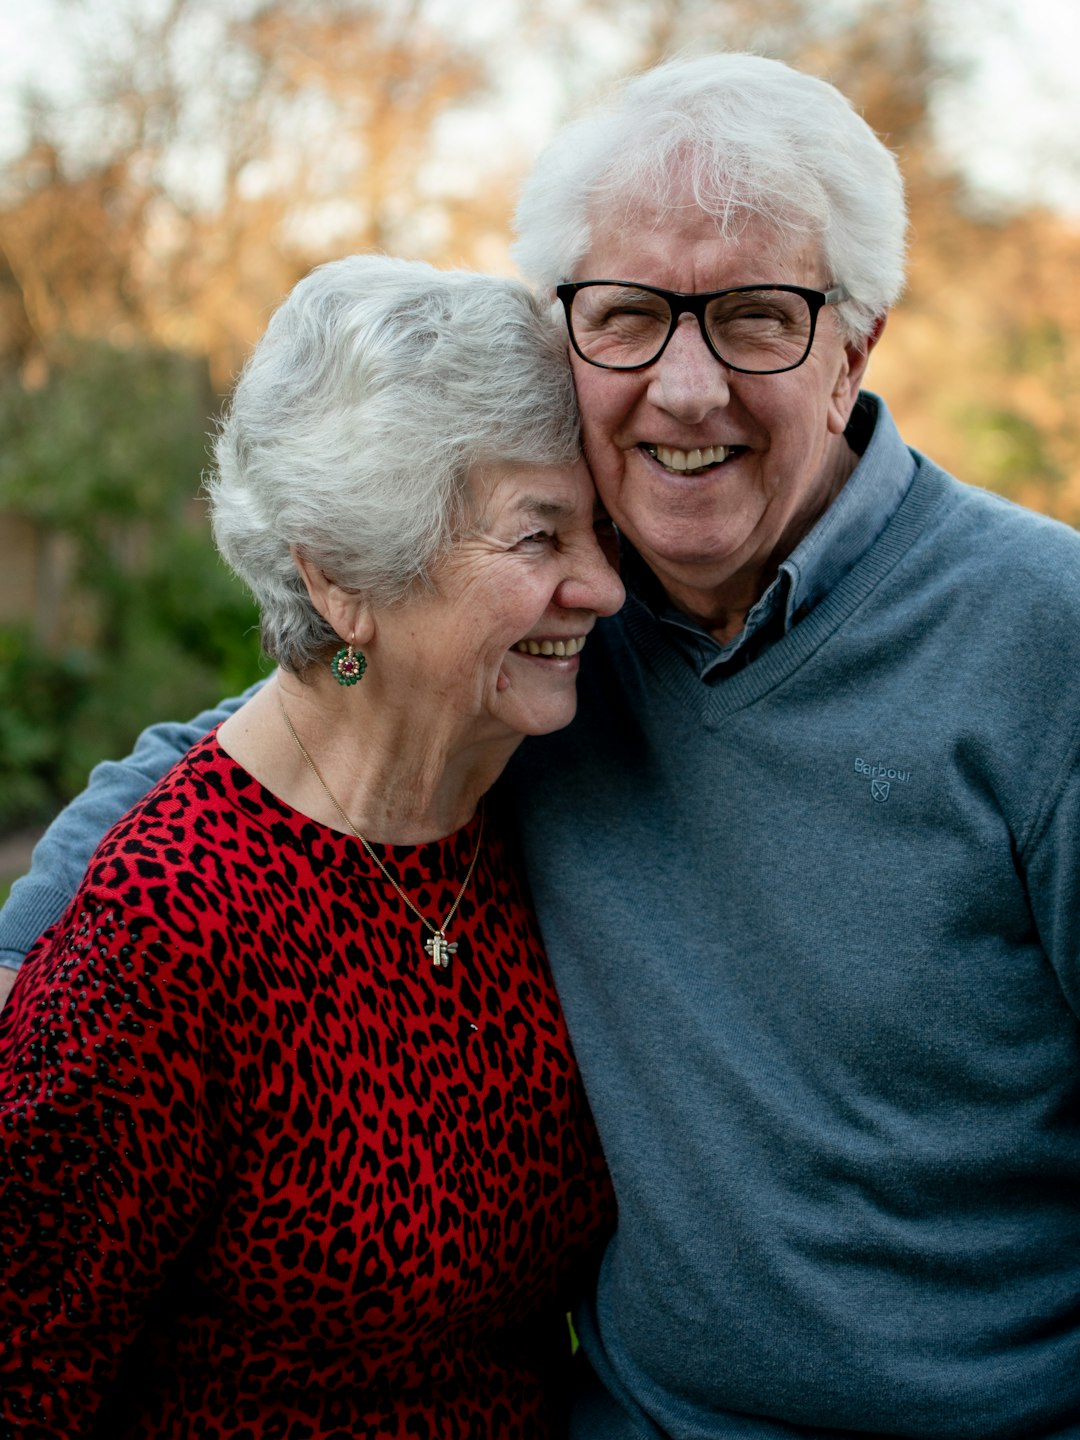 500 Old Couple  Pictures HD Download Free  Images on 